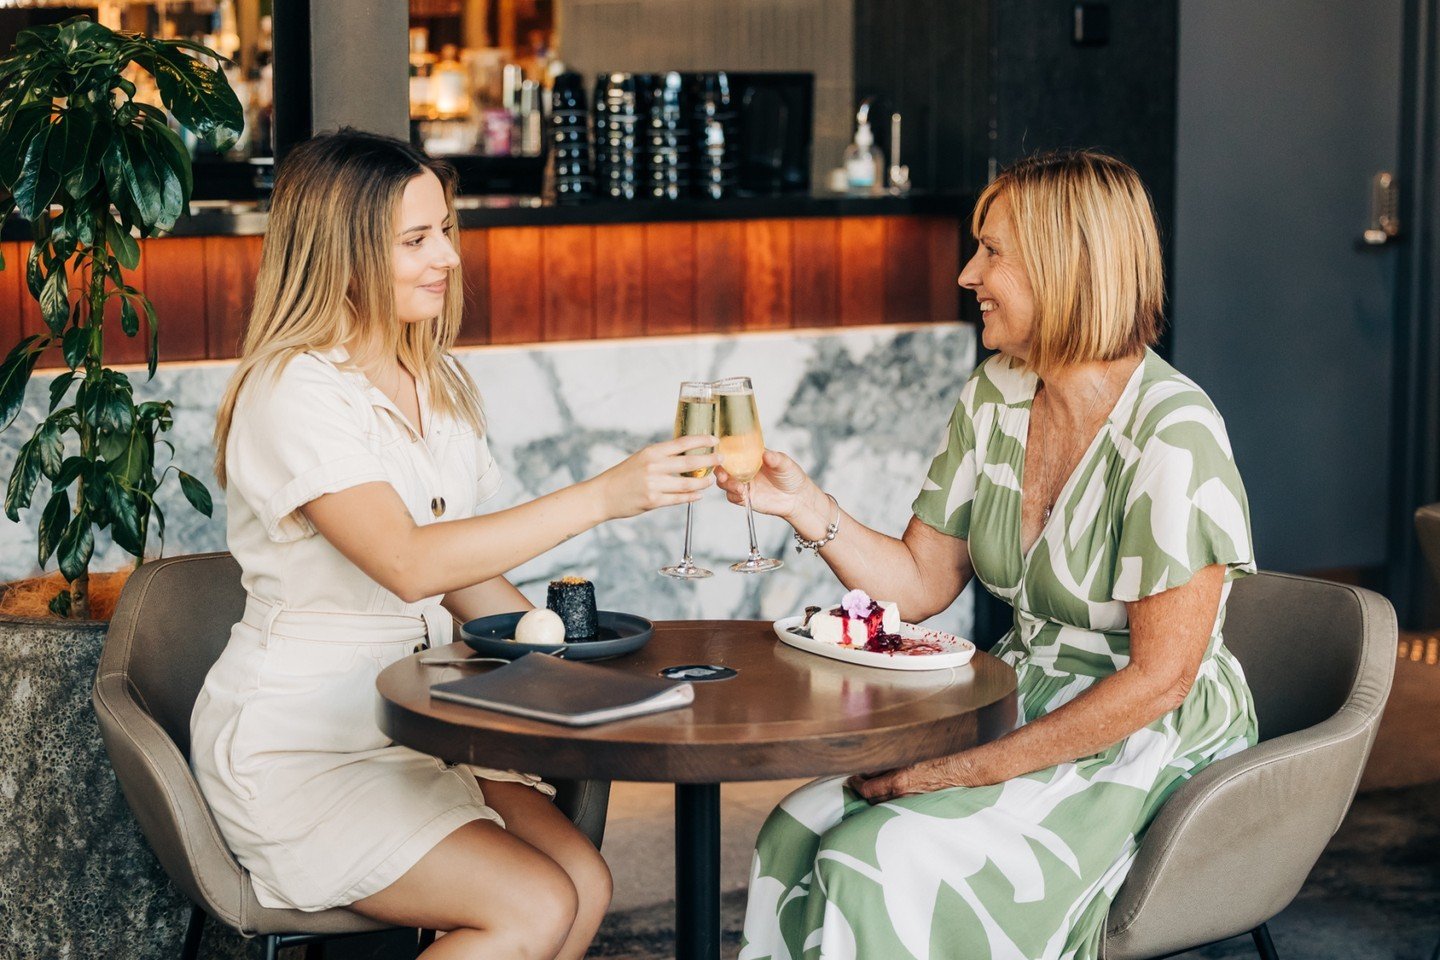 Cheers to you, Mum - Happy Mother's Day from all of us here at Hotel Gosford!

If you're looking for a last-minute reservation, we still have plenty of space for dinner. Book your table now via our website.

#HotelGosford #MothersDay